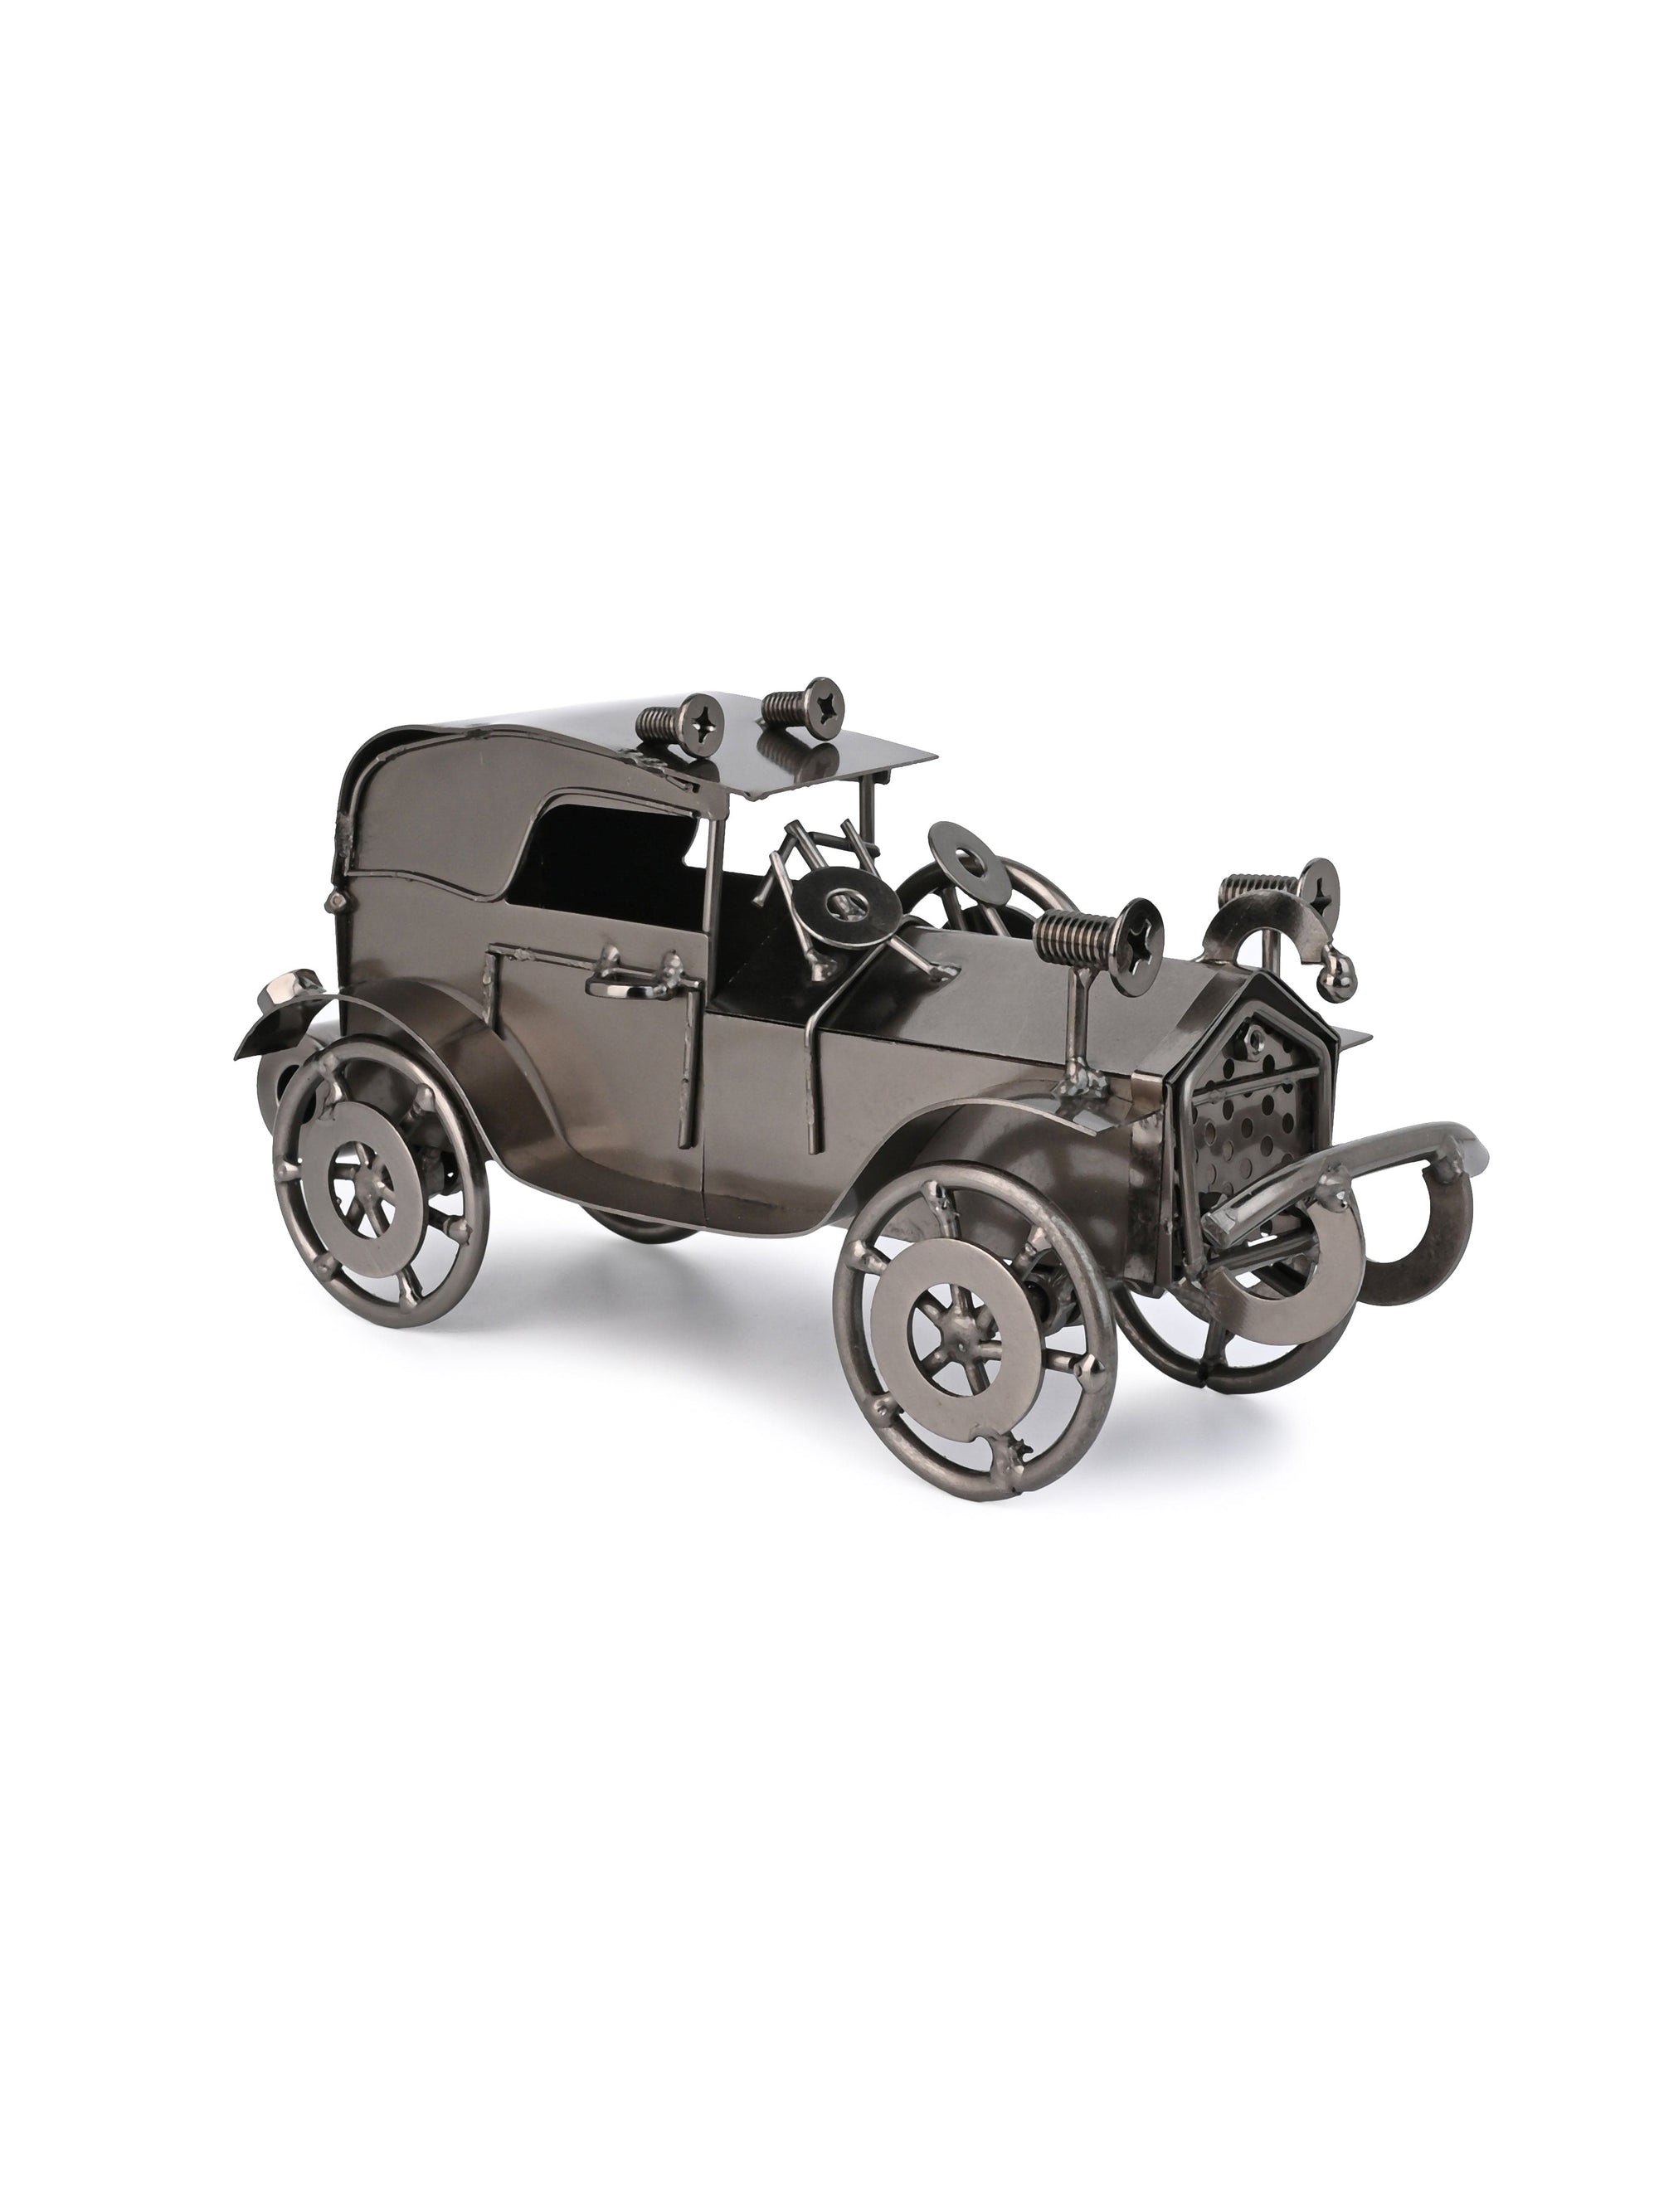 Miniature Replica of Vintage Car for Home Office Decor - 8 inches